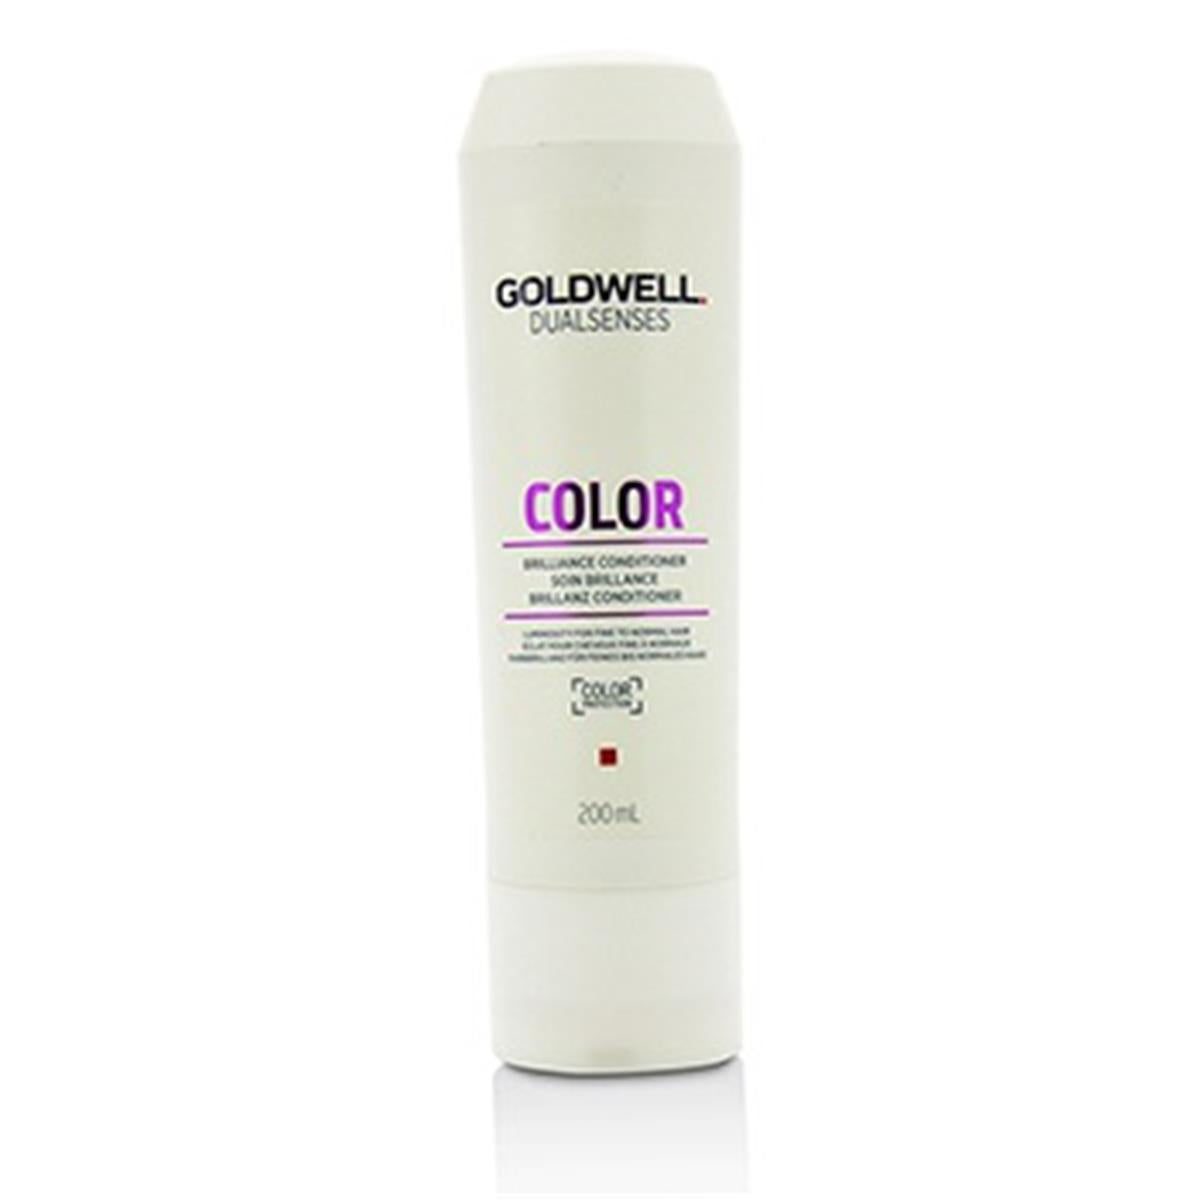 Goldwell 215846 200 ml Dual Senses Color Brilliance Conditioner - Luminosity for Fine to Normal Hair One Size